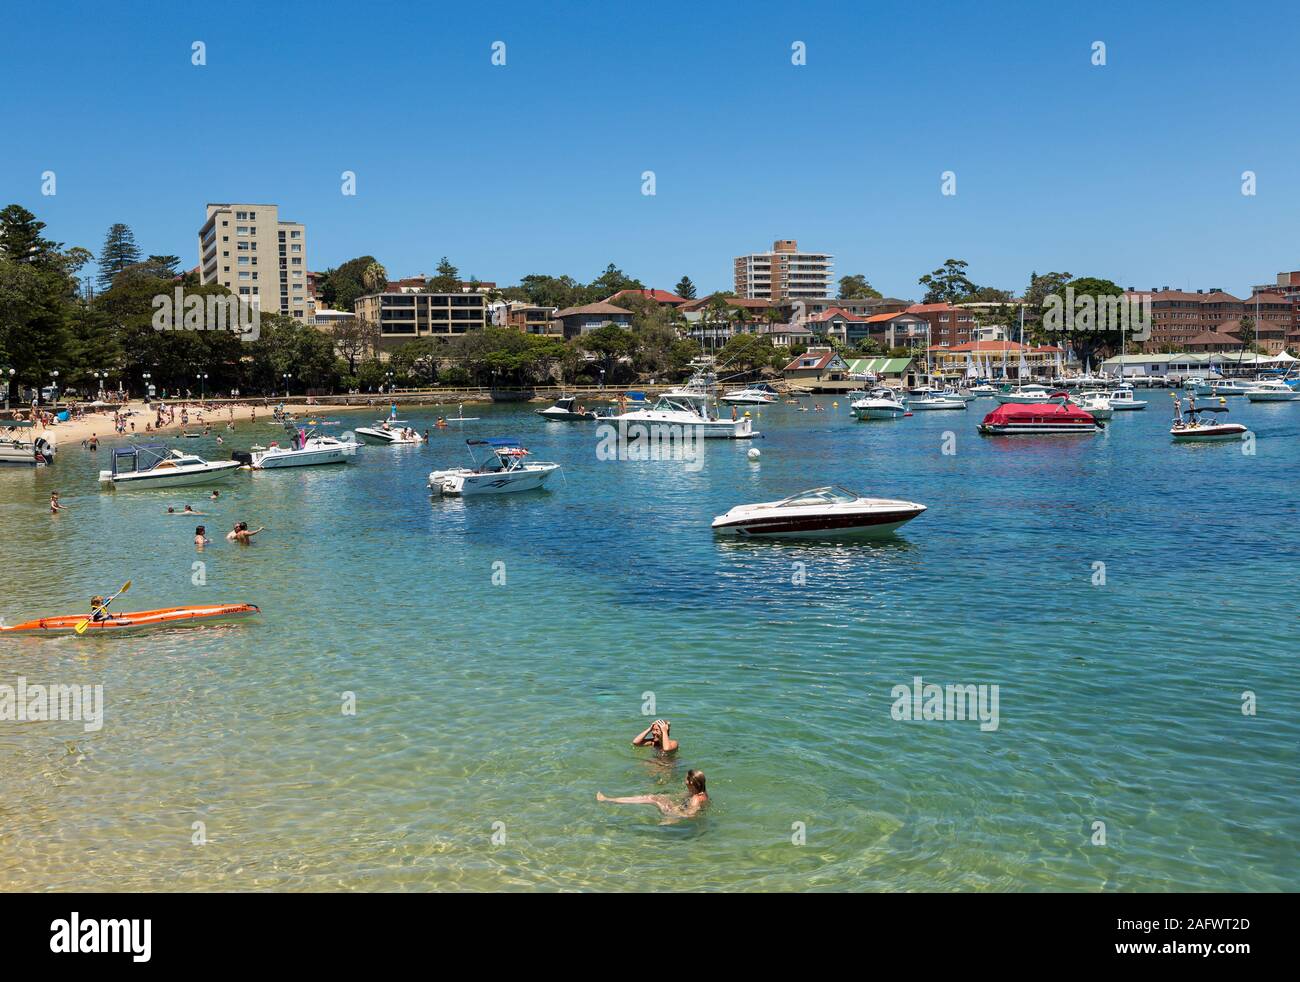 People at the cove, Manly beach, Sydney, Australia Stock Photo